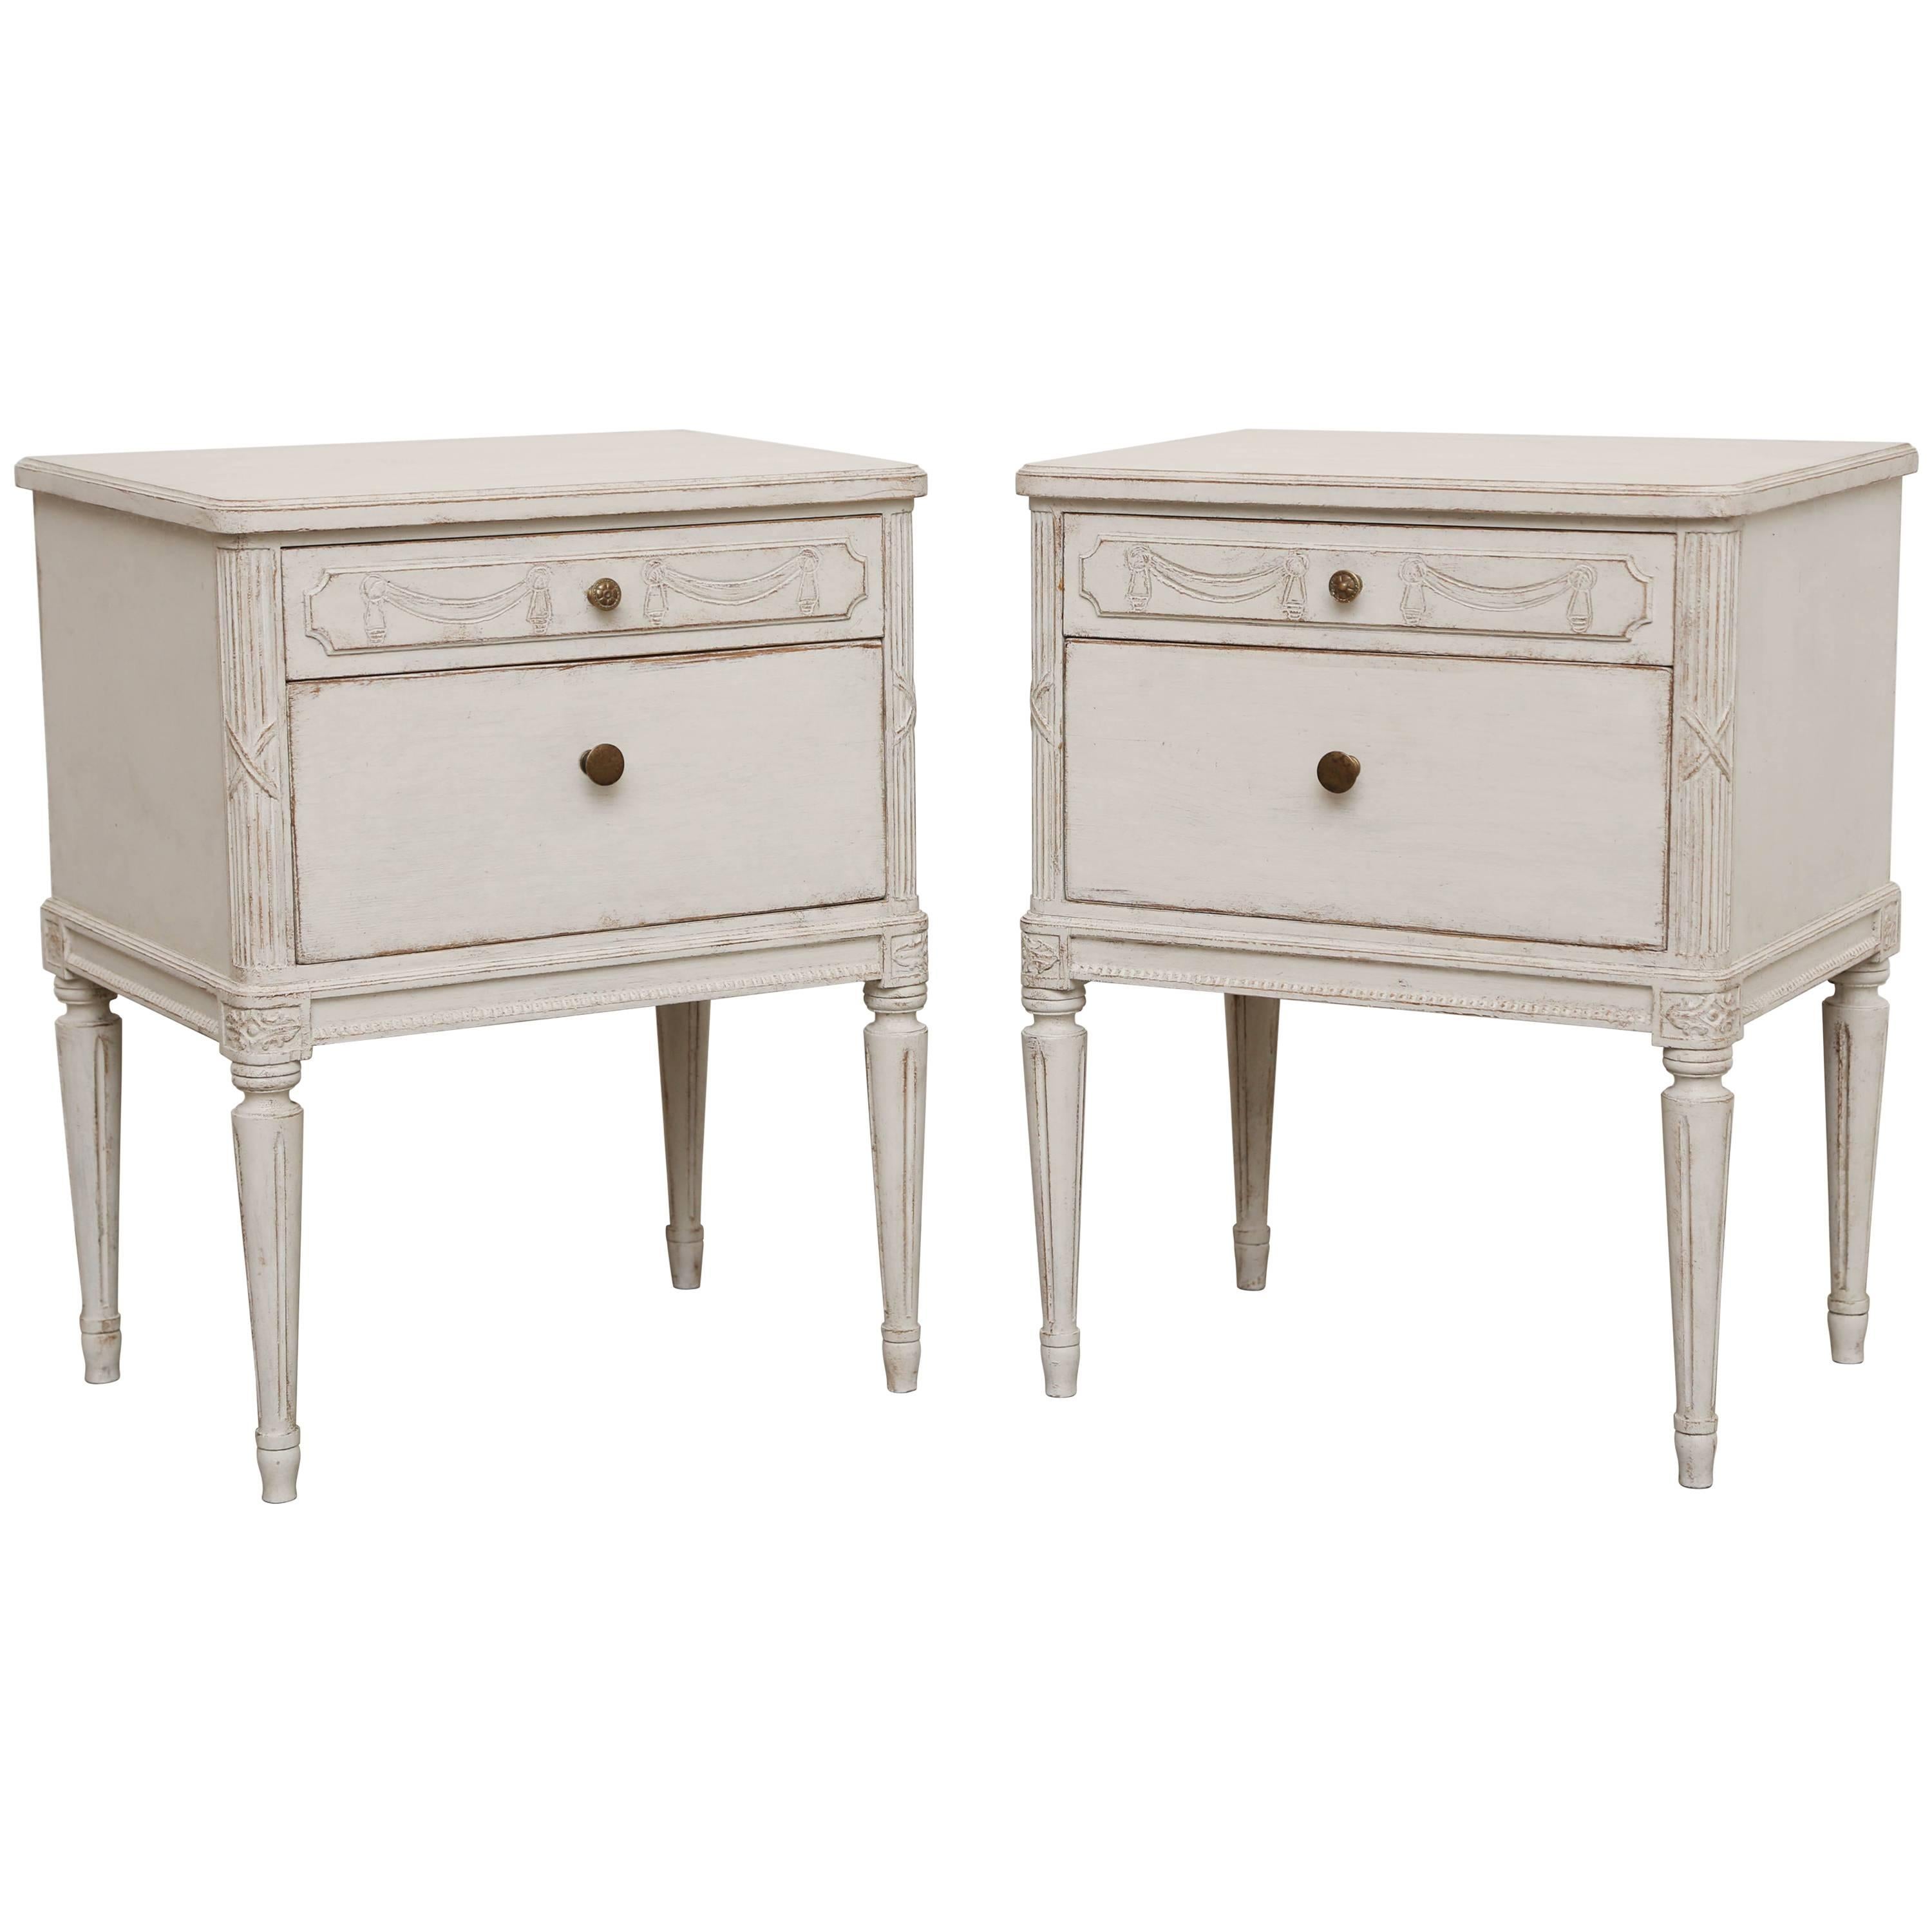 Antique Swedish Painted Pair of Nightstands, Early 20th Century